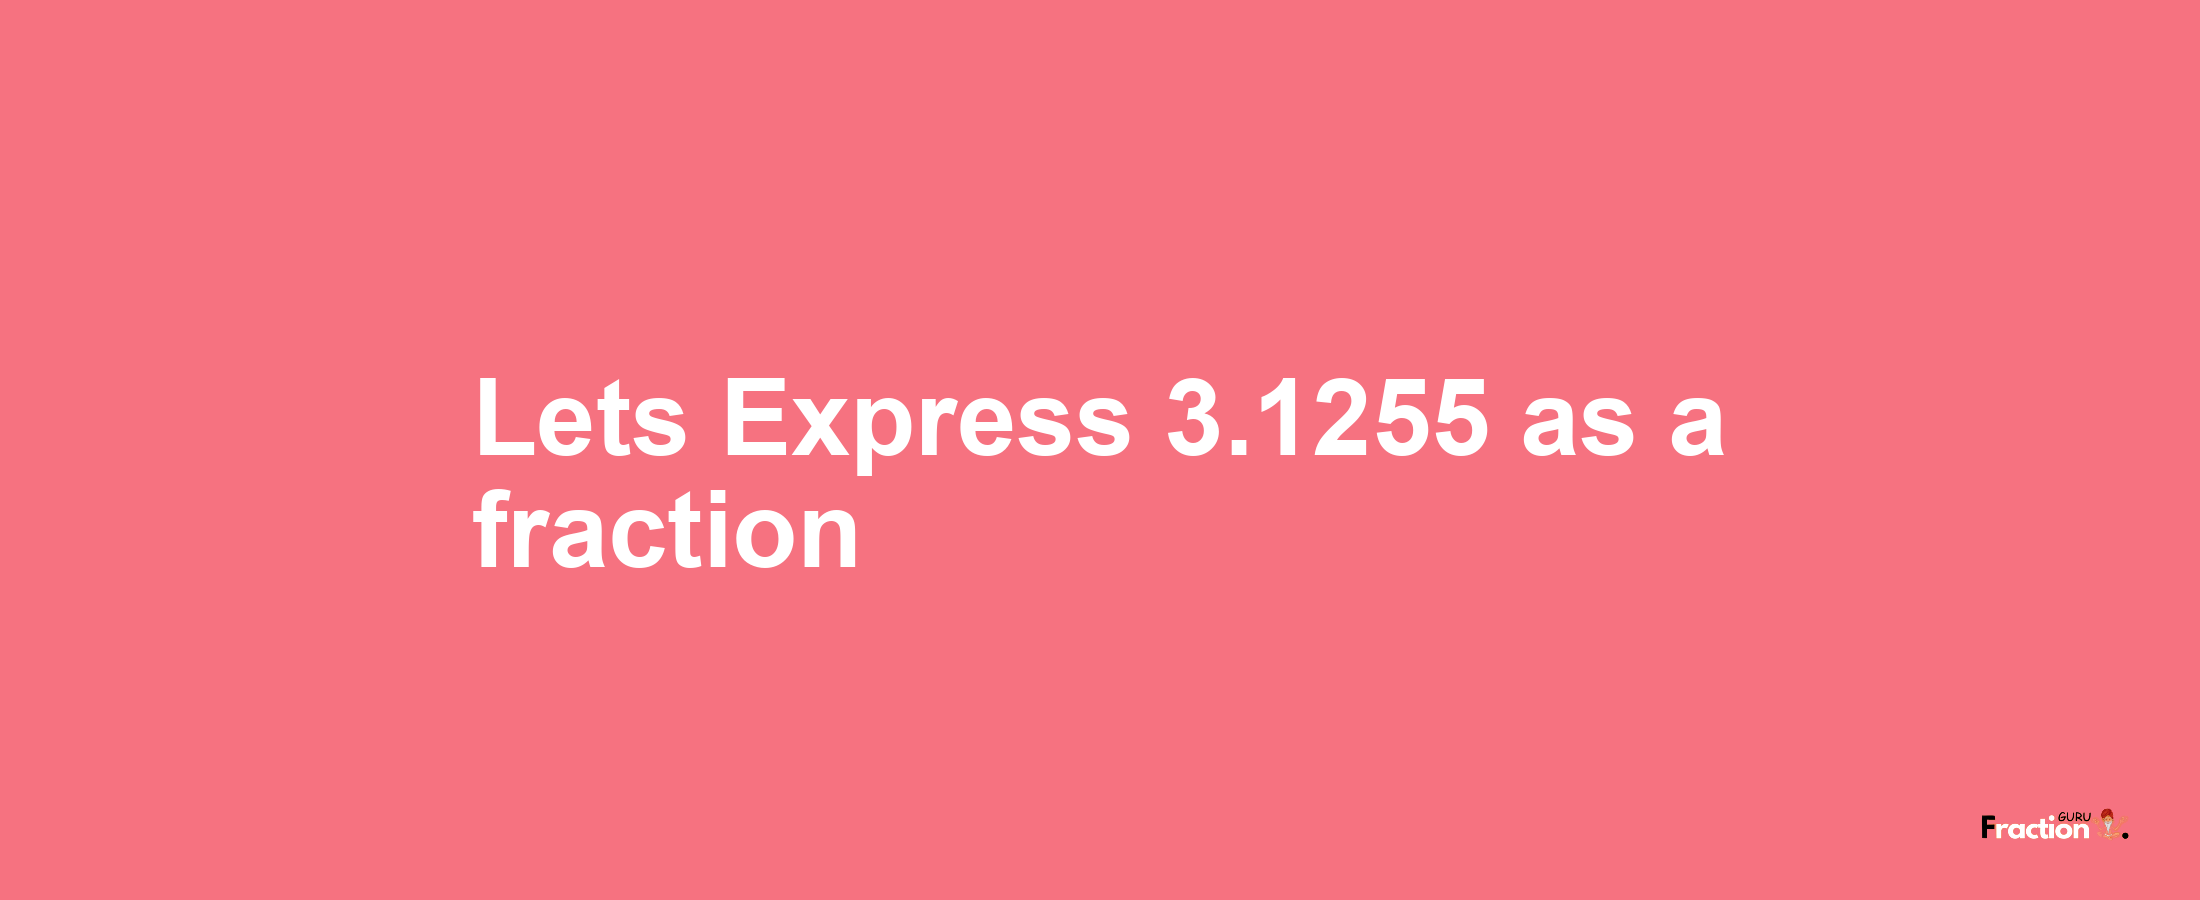 Lets Express 3.1255 as afraction